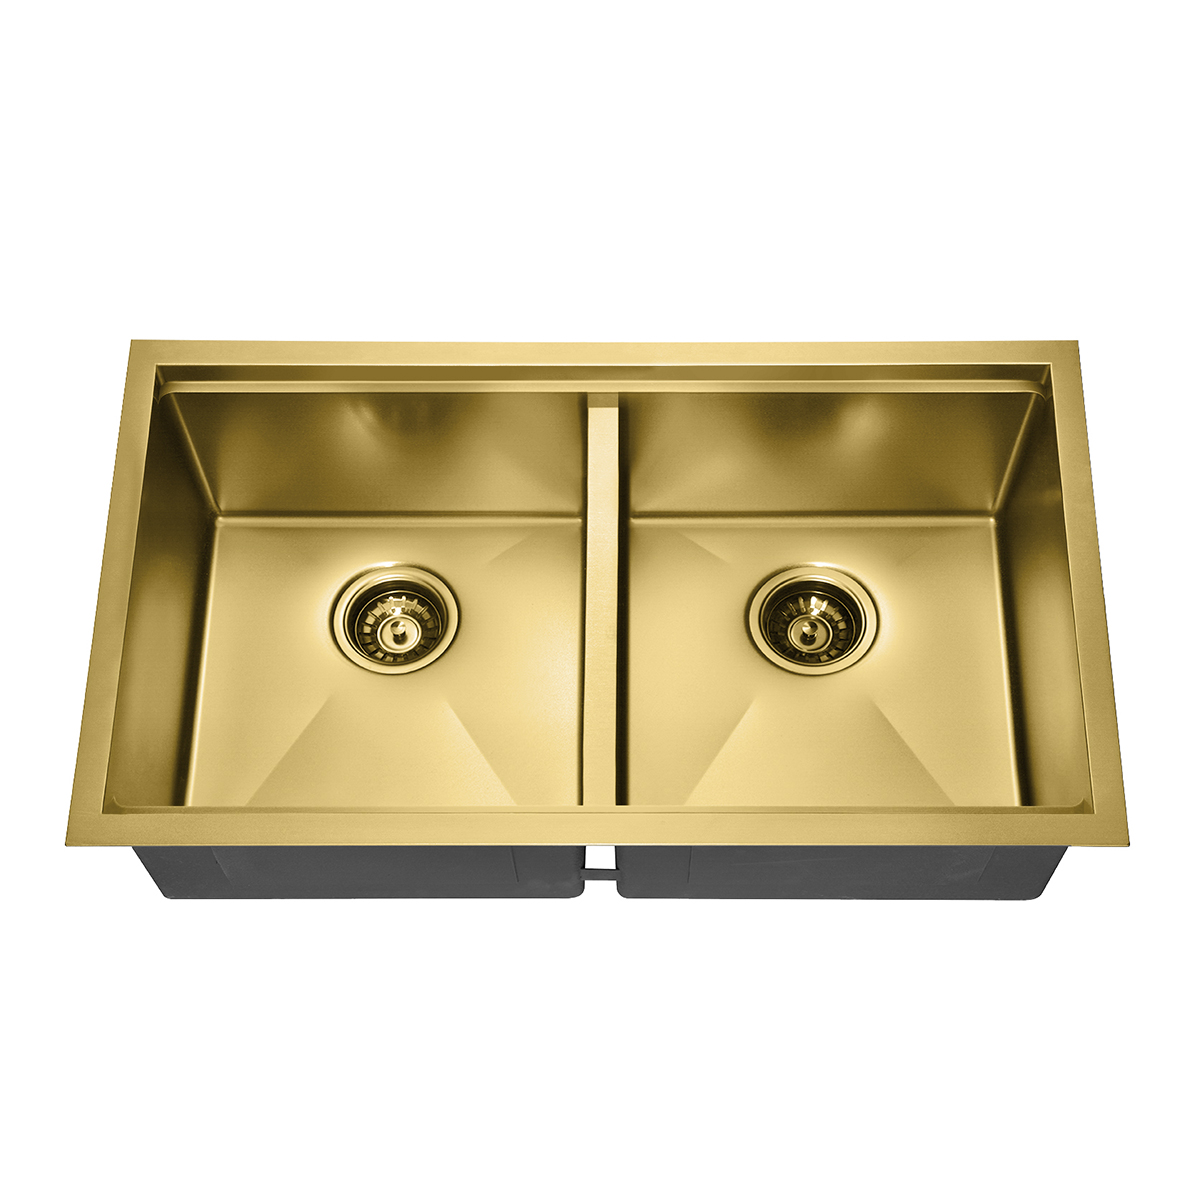 Gold Color Stainless Steel Double Bowl Kitchen Sink with Ledge